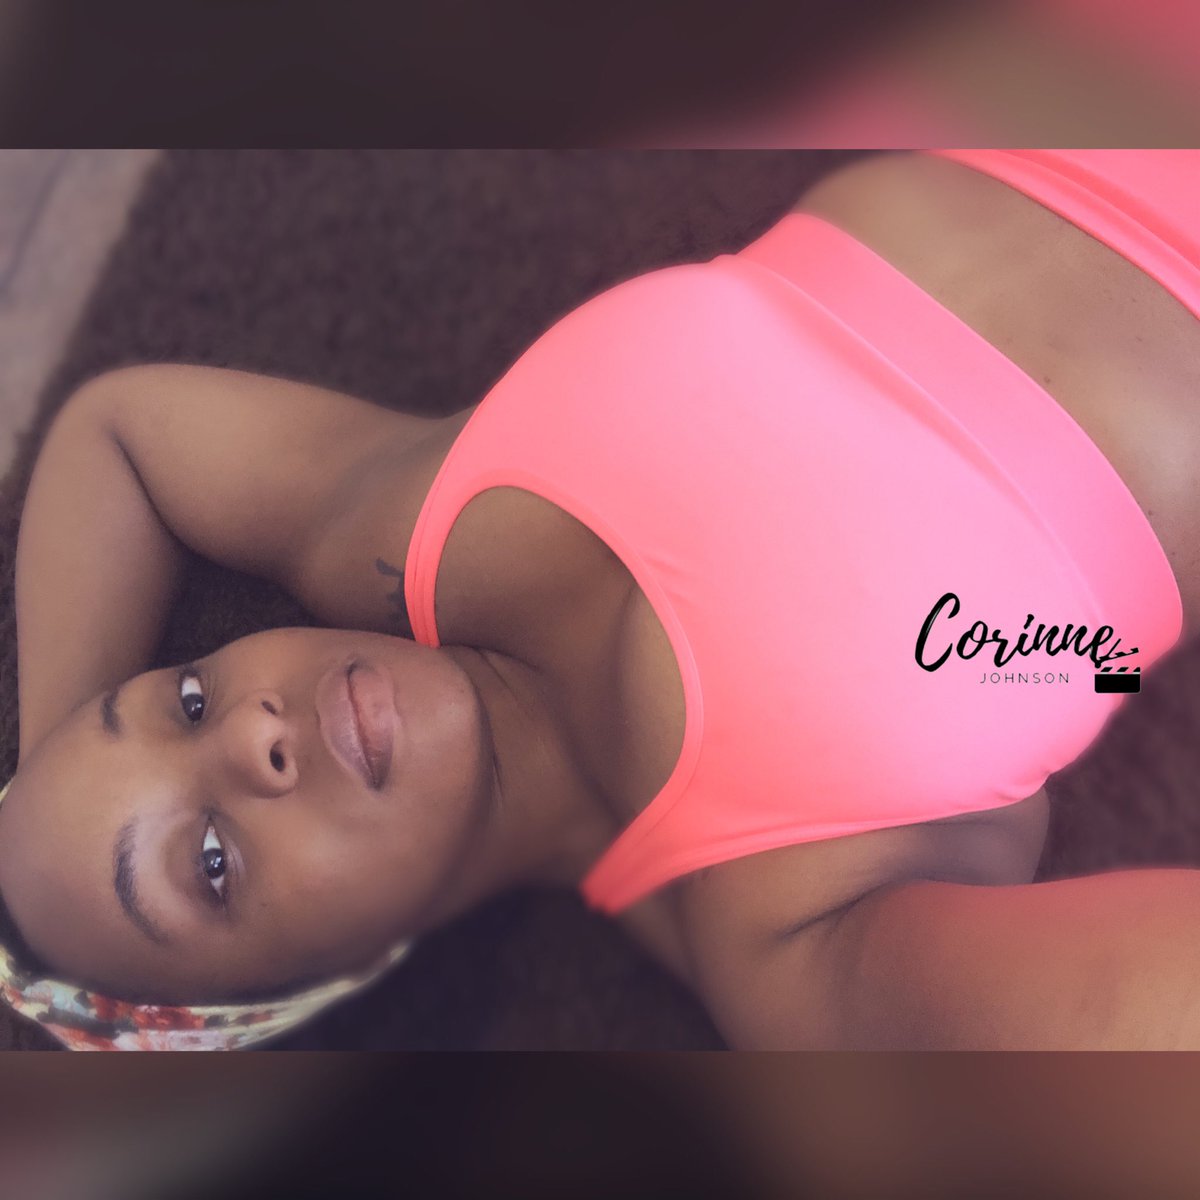 I found a strength I’ve never known 💯💆🏾‍♀️♥️!
#relax #corinnejohnson #castingdirectors #bossbabes #IndigenousPeoplesDay #savannahga #corinneday #thedailycorinne #loveacting